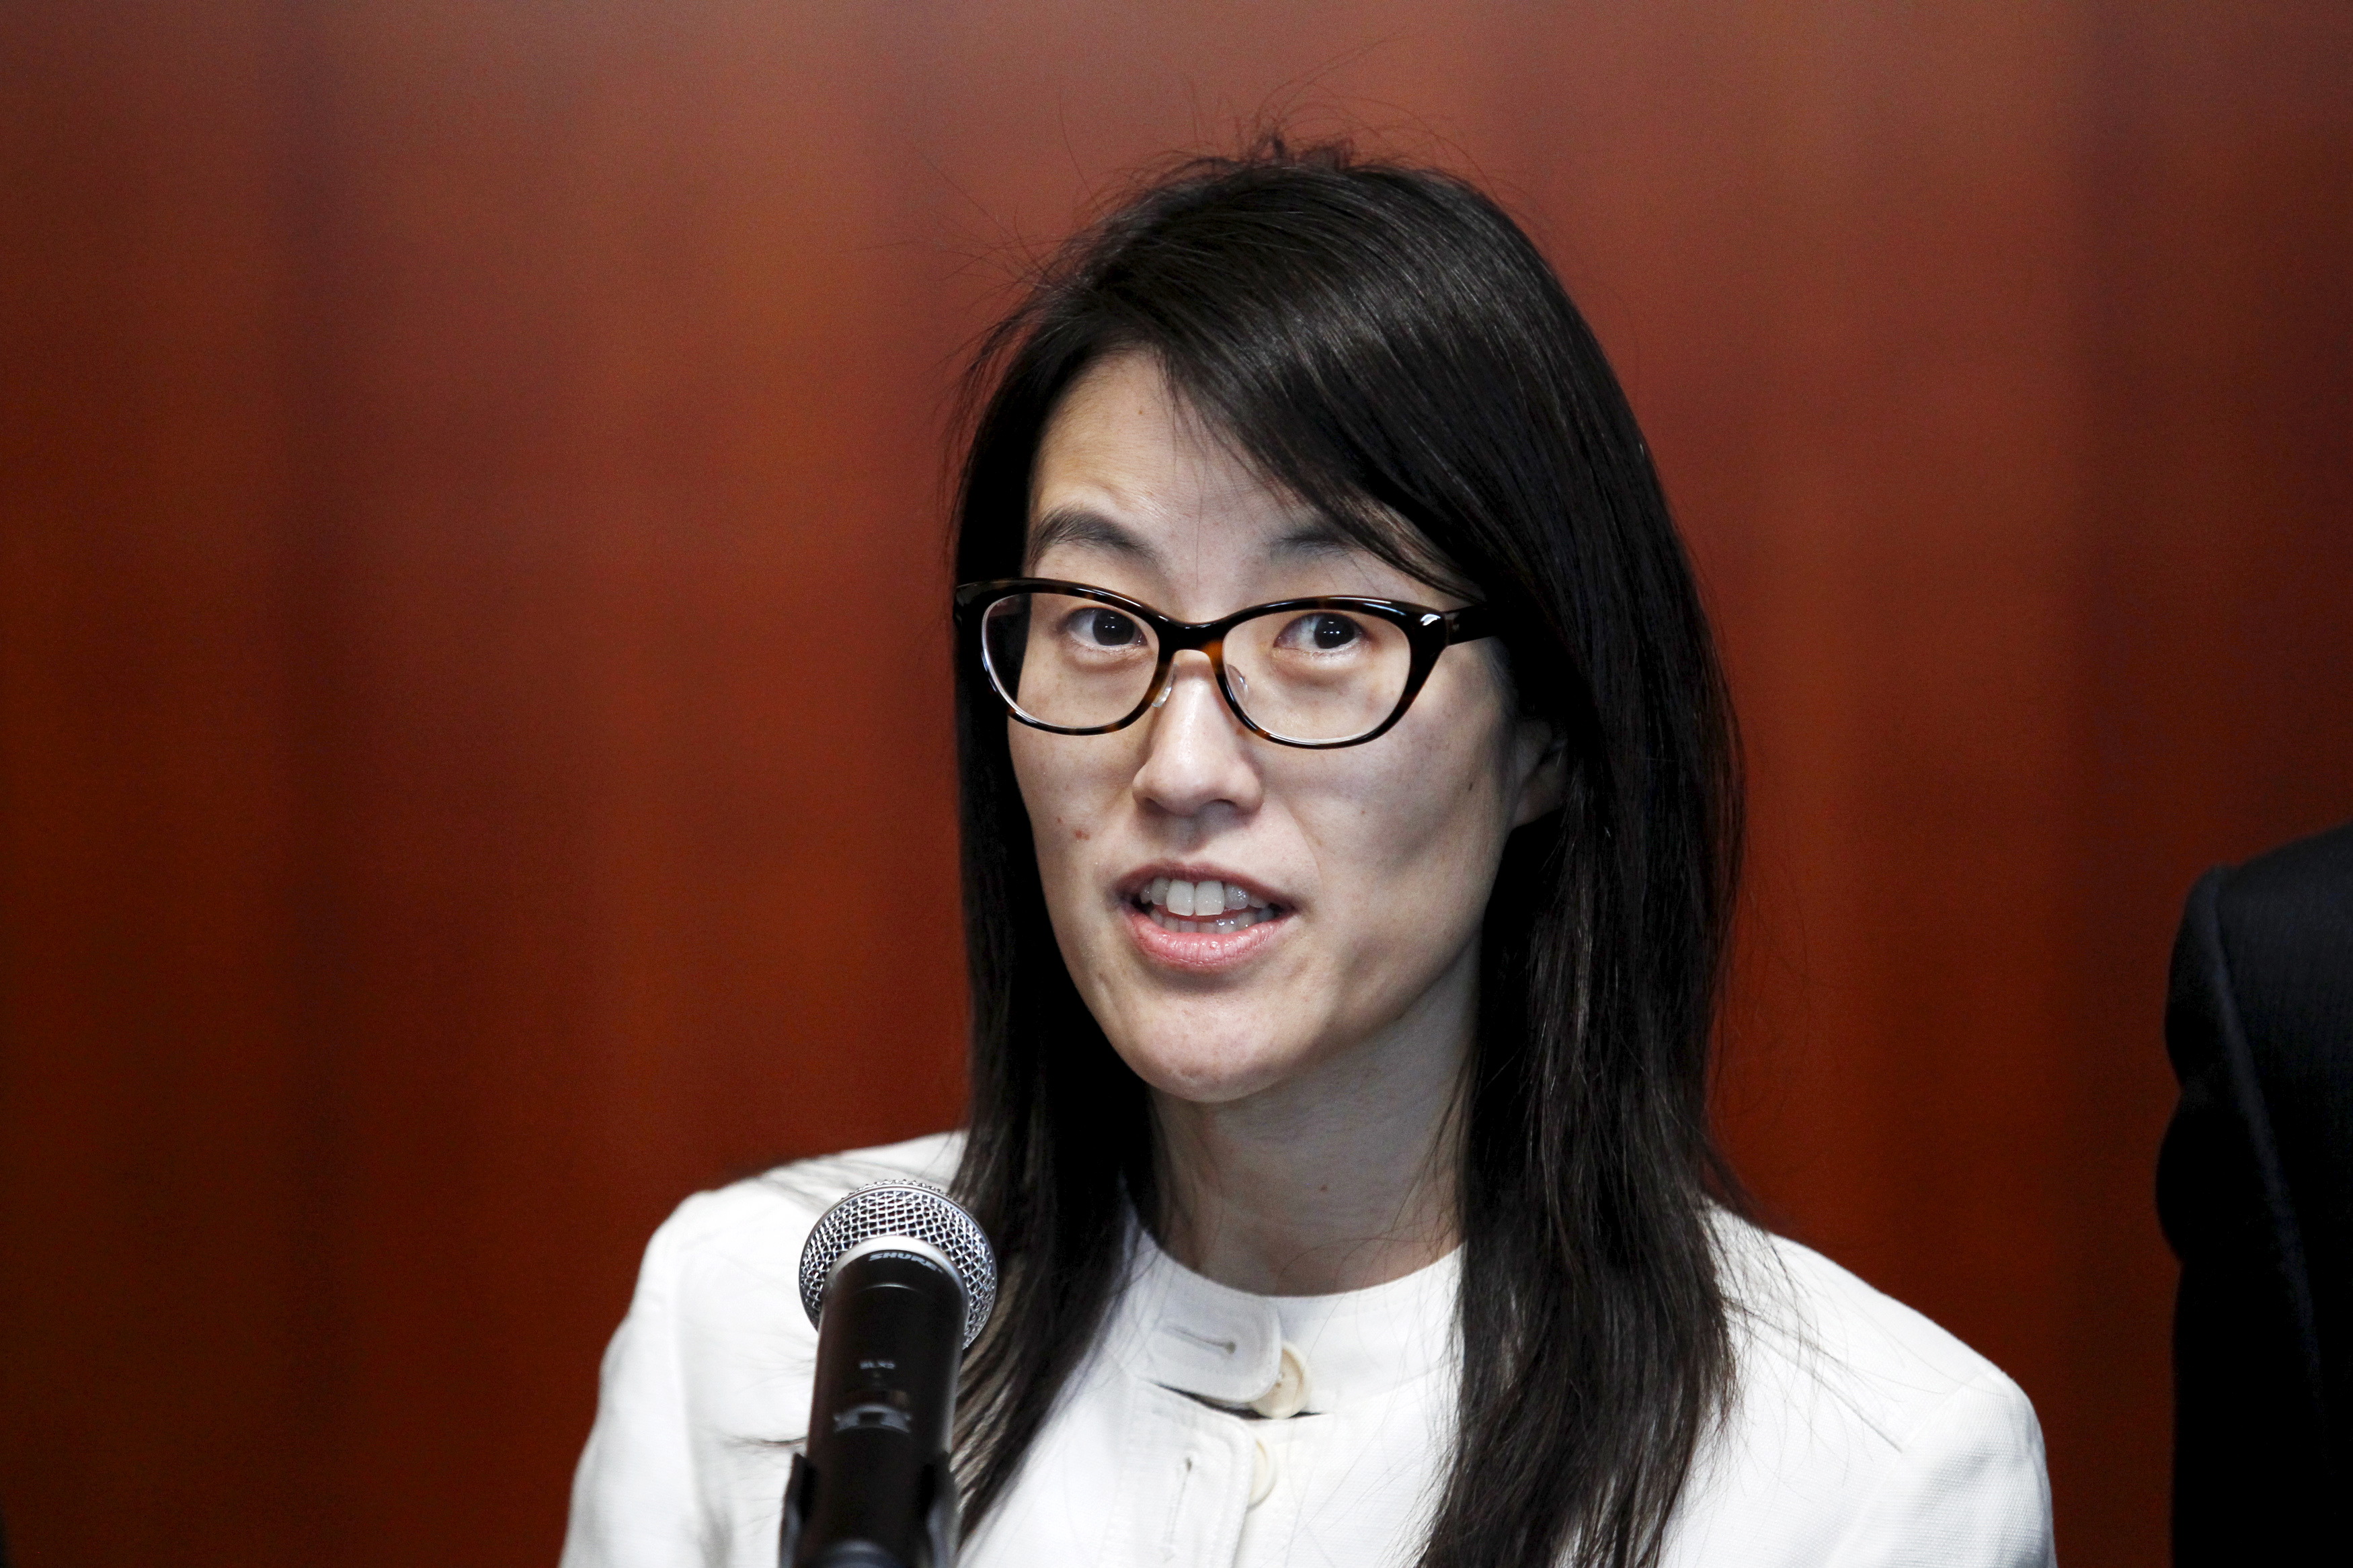 Ellen Pao speaks to the media after losing her high profile gender discrimination lawsuit against venture capital firm Kleiner, Perkins, Caufield and Byers in San Francisco, California in this March 27, 2015, file photo. Pao faces an uphill battle should she choose to appeal her defeat last week in a gender discrimination lawsuit against former employer Kleiner, Perkins, Caufield &amp; Byers, the Silicon Valley venture capital firm. REUTERS/Beck Diefenbach/Files